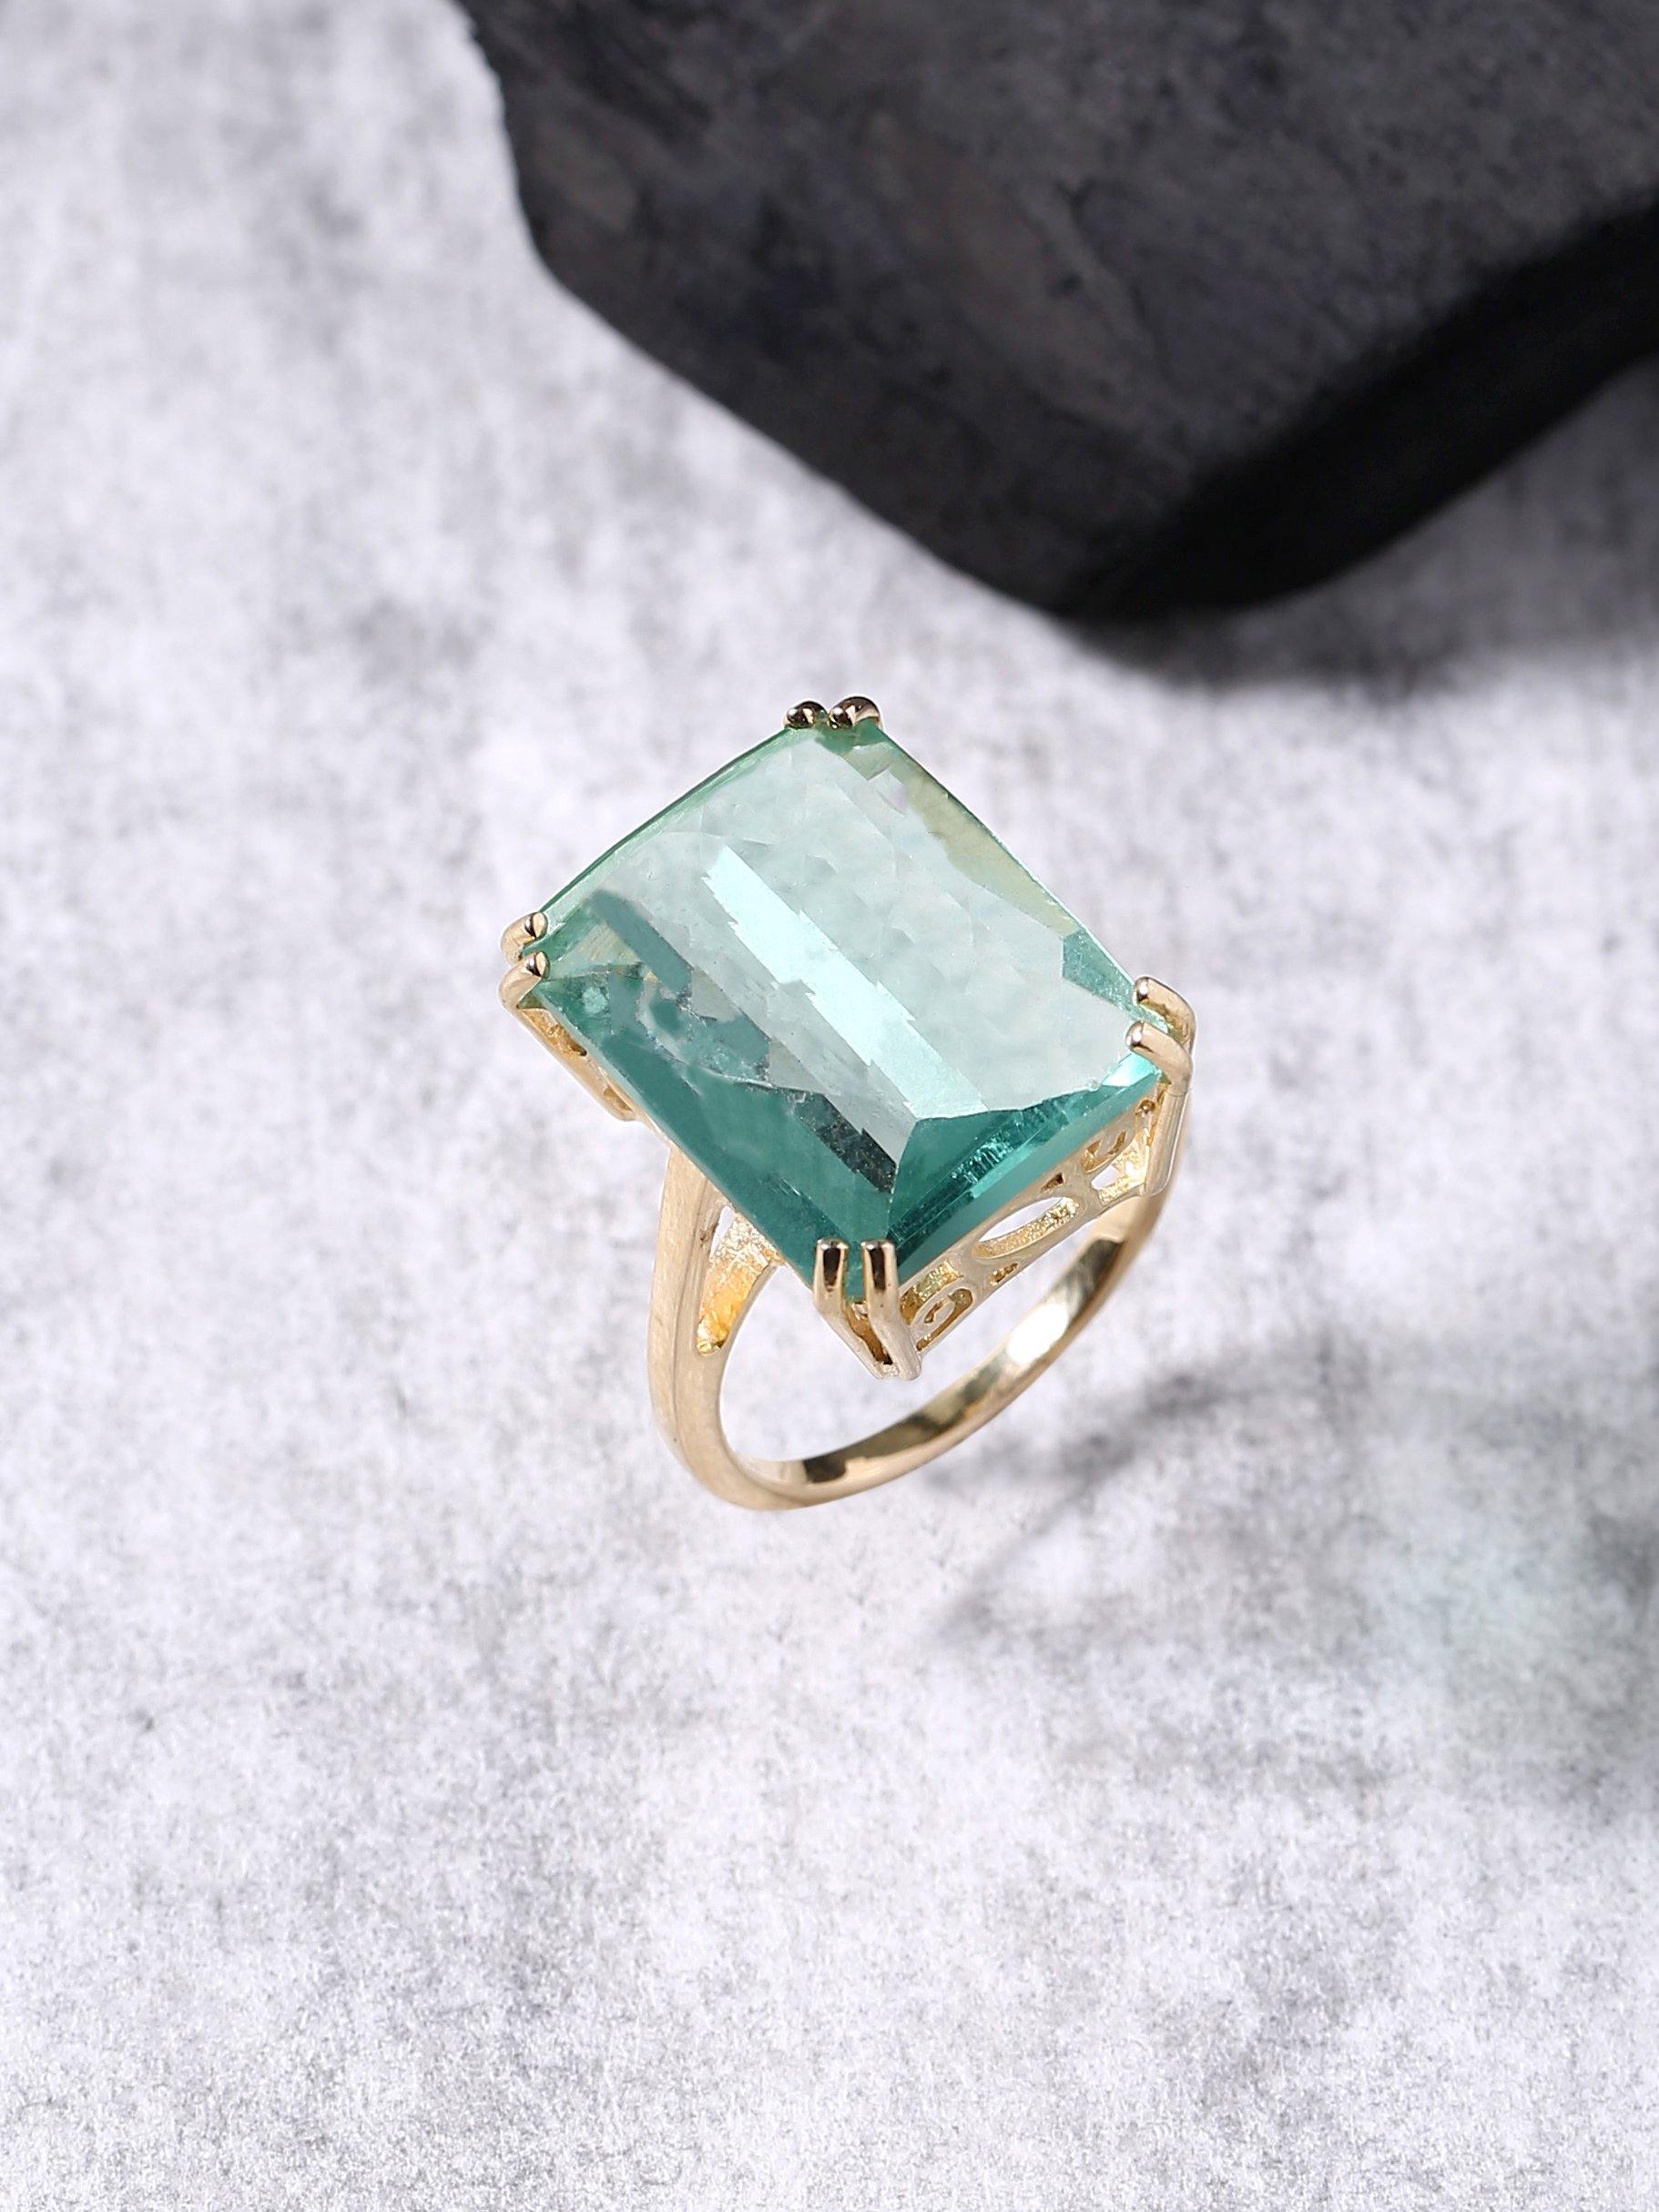 Green Fluorite Solid 925 Sterling Silver Gold Plated Statement Ring Jewelry - YoTreasure